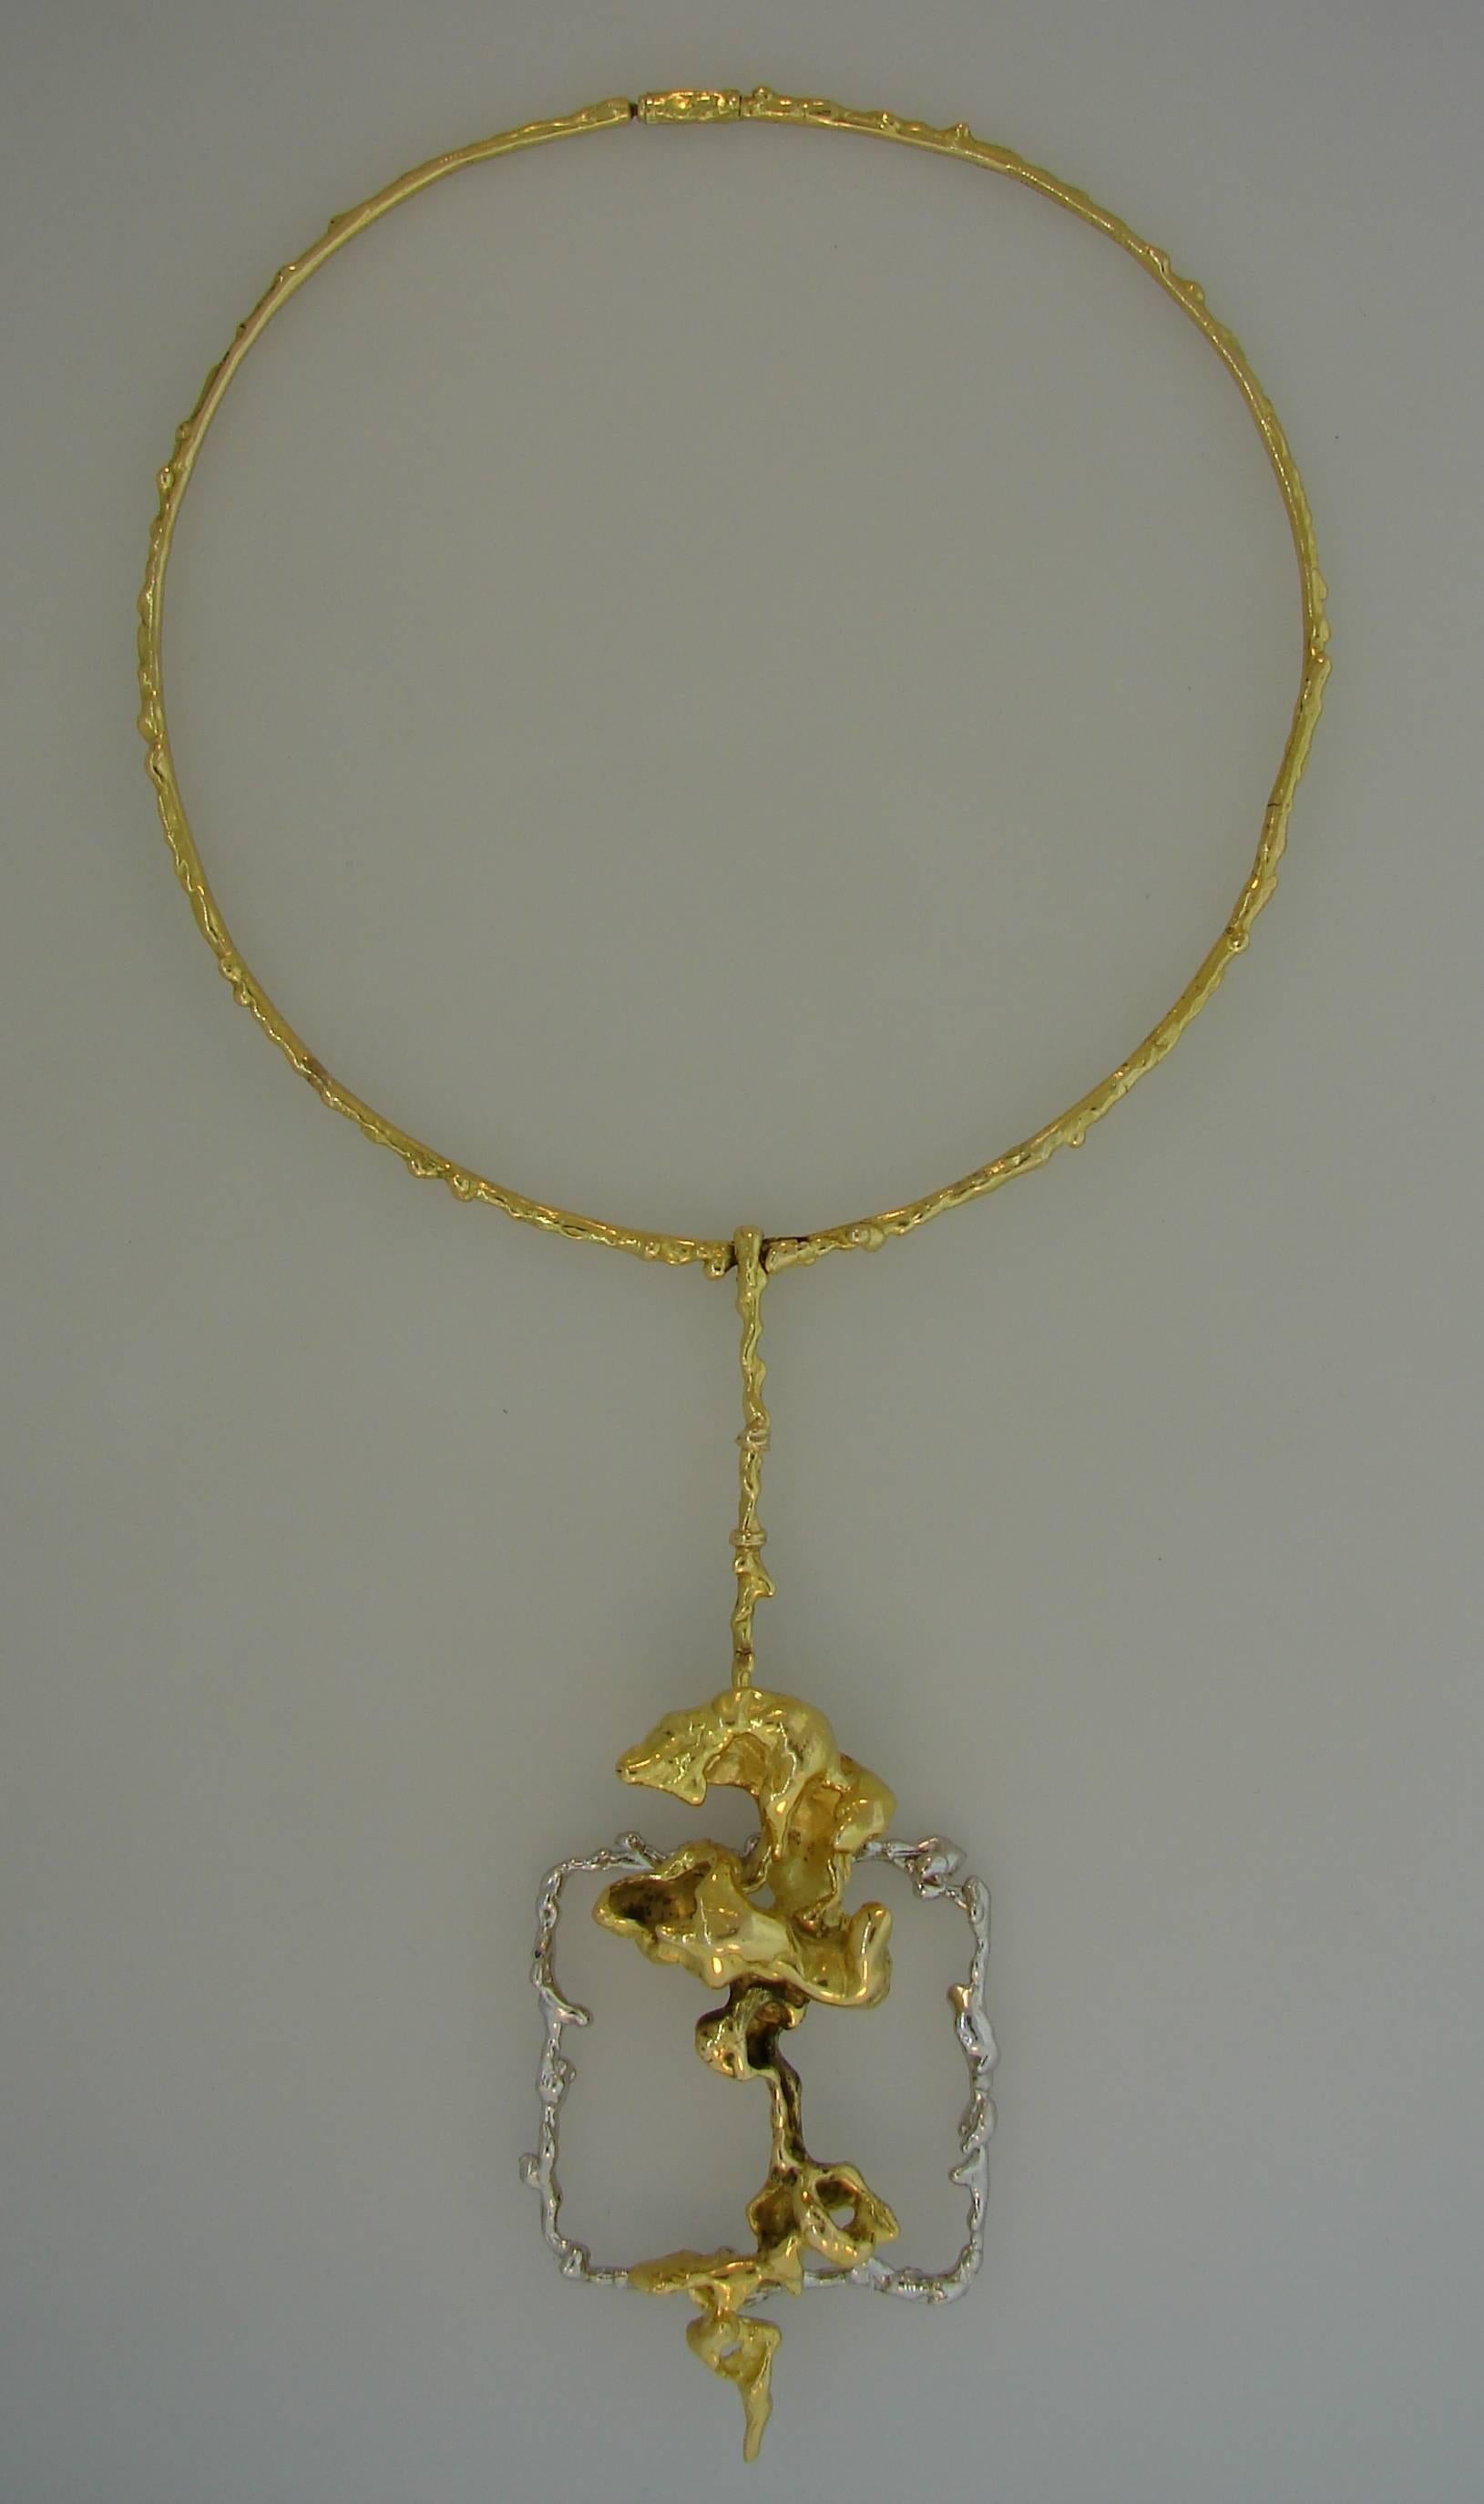 Sterle Paris Two-Tone Gold Pendant Necklace, 1950s In Good Condition For Sale In Beverly Hills, CA